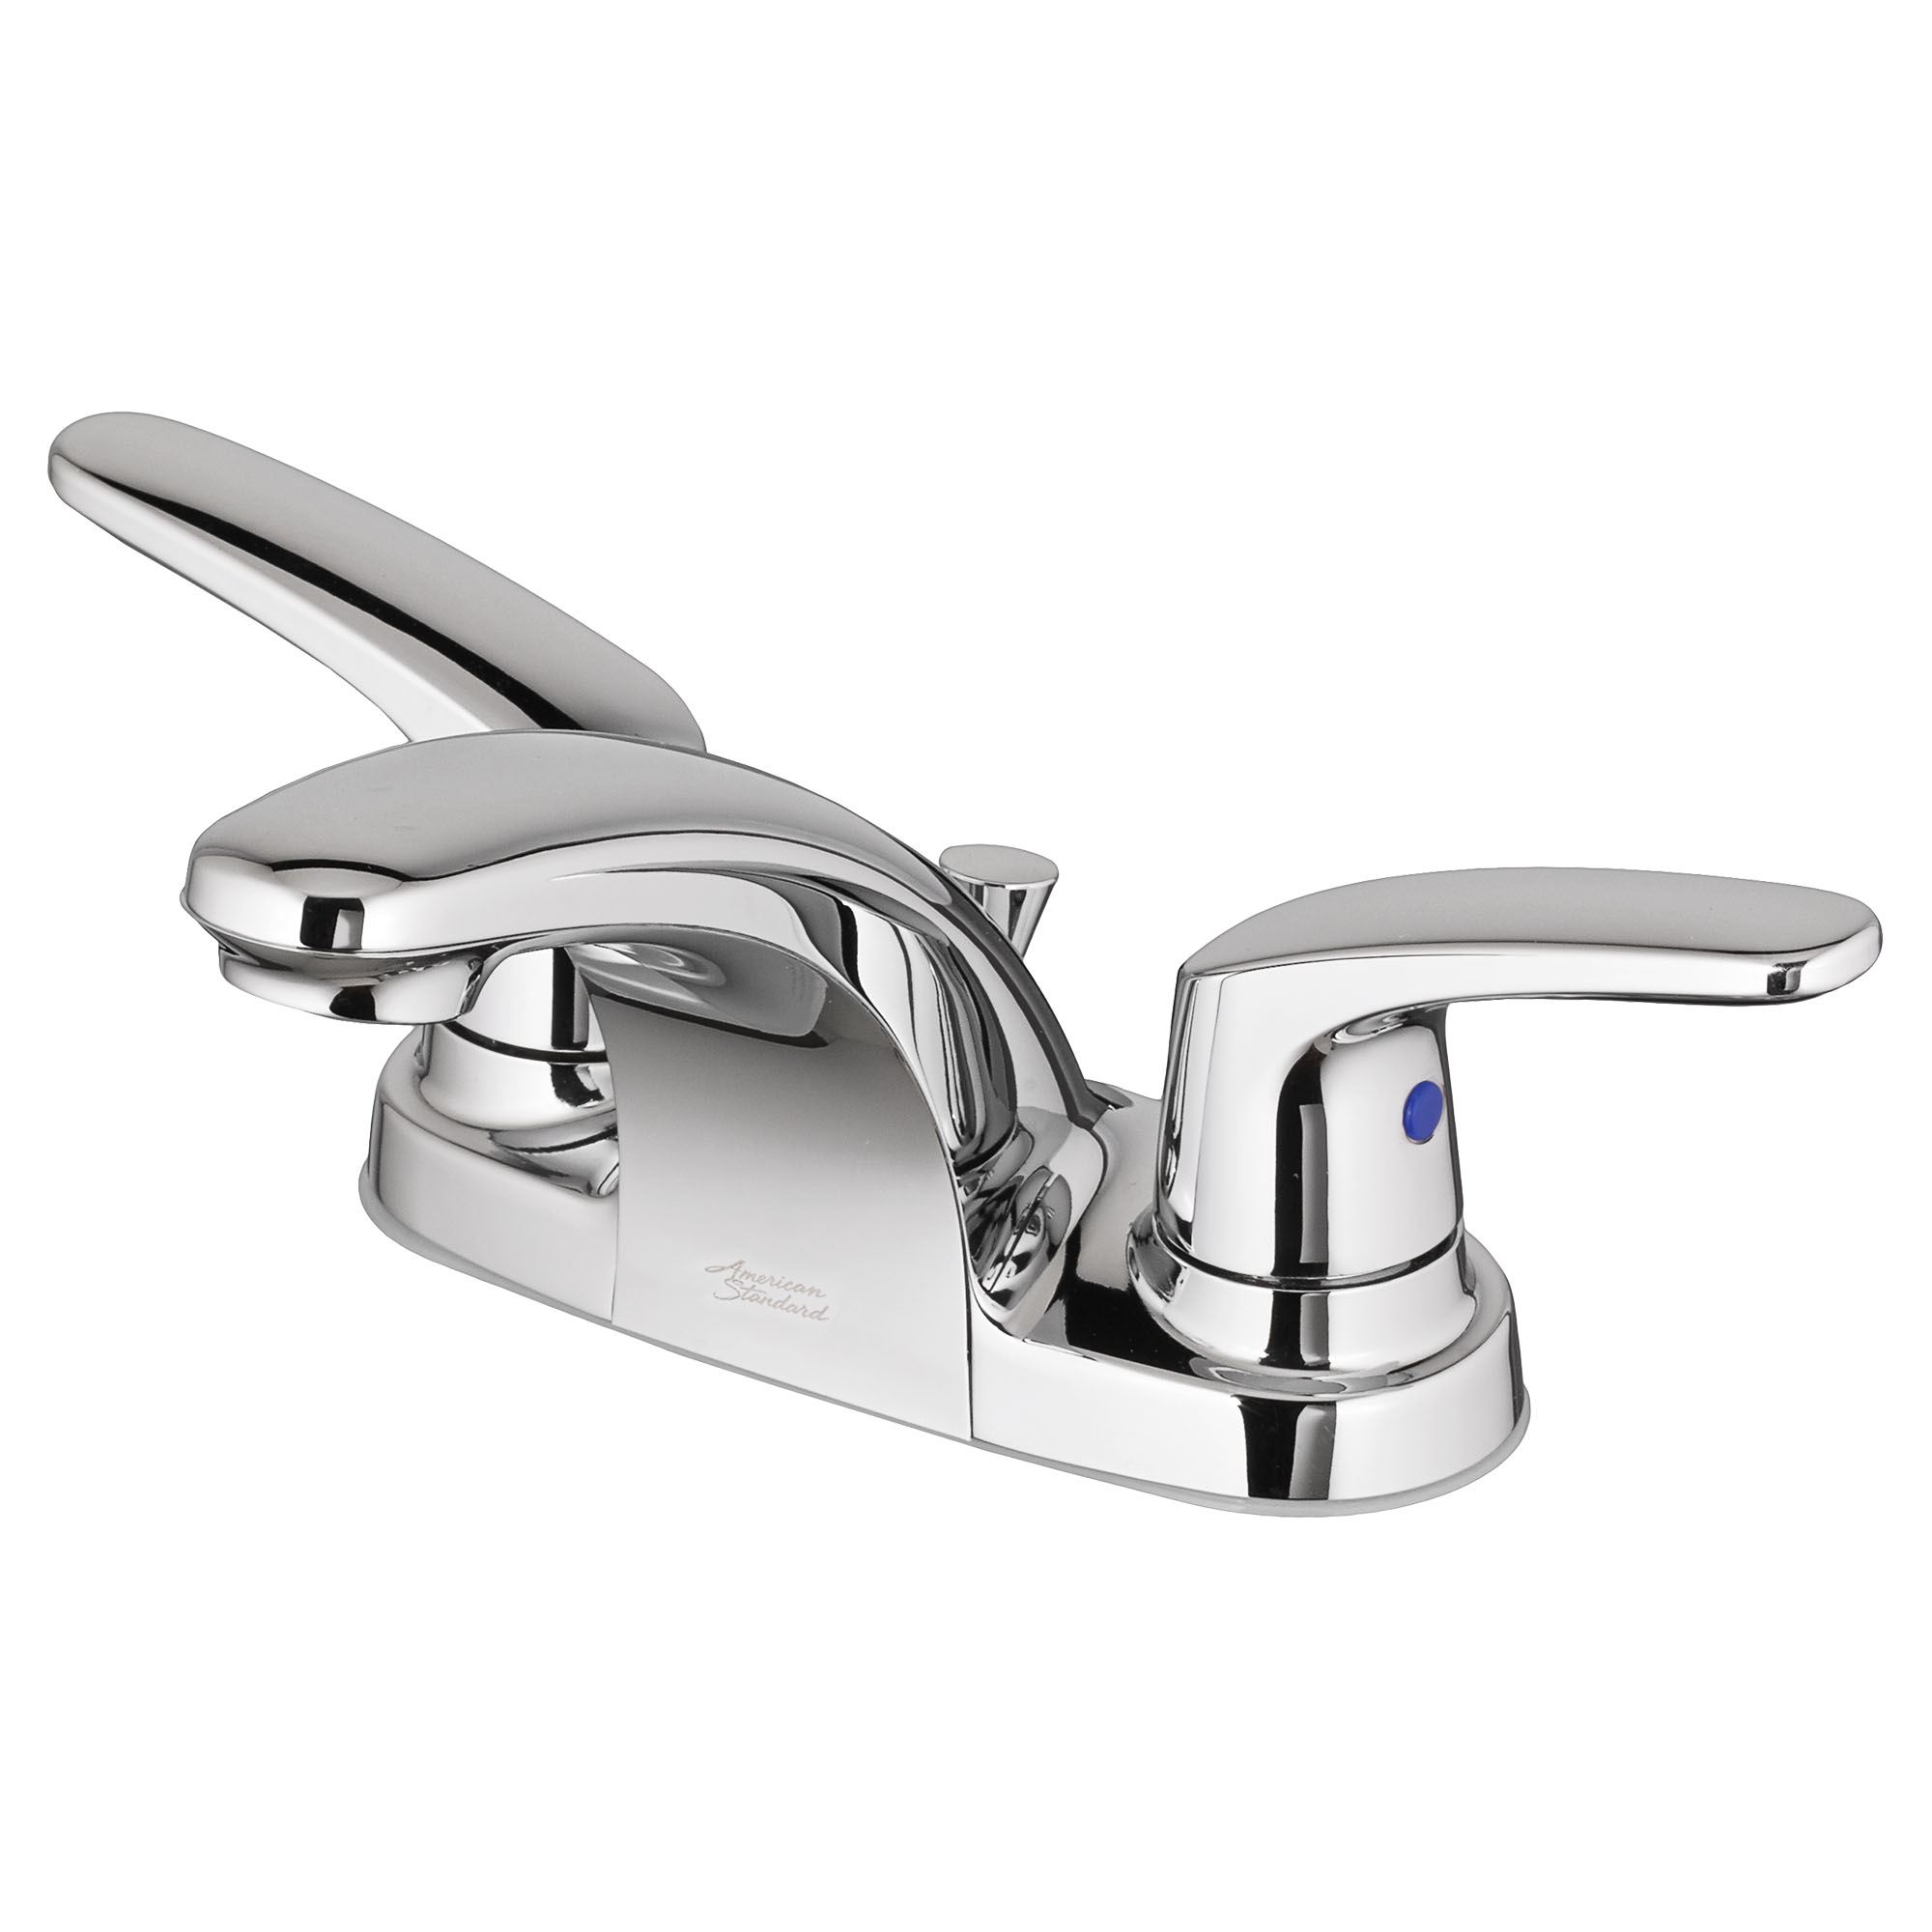 Colony® PRO 4-Inch Centerset 2-Handle Bathroom Faucet 0.5 gpm/1.9 Lpm With Lever Handles